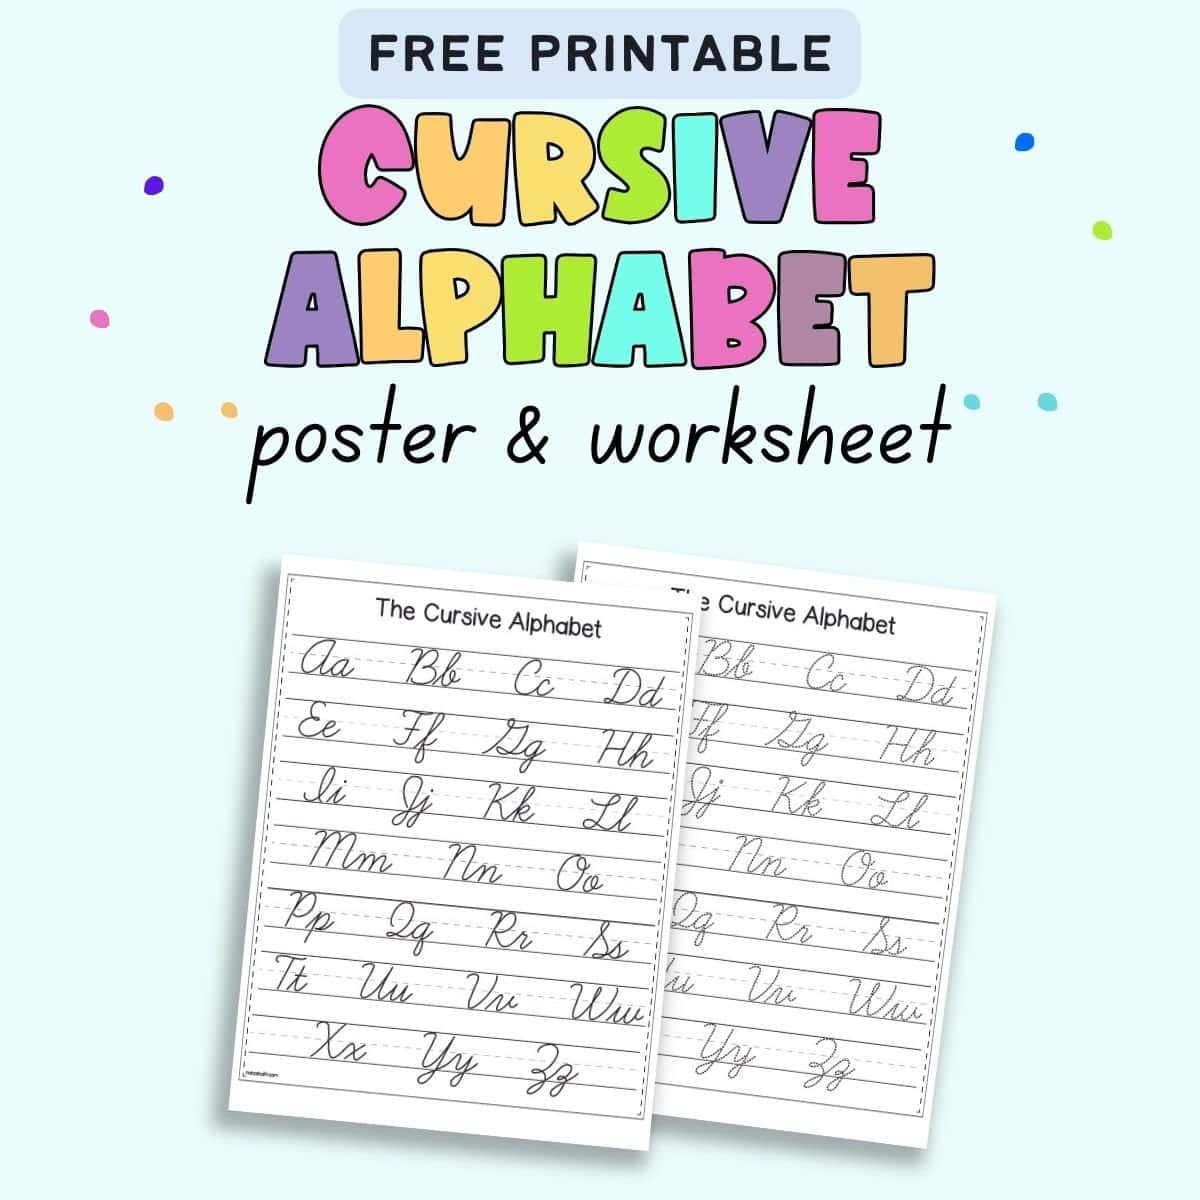 Text "Free printable cursive alphabet poster & worksheet" with a  preview of two printable cursive alphabet pages